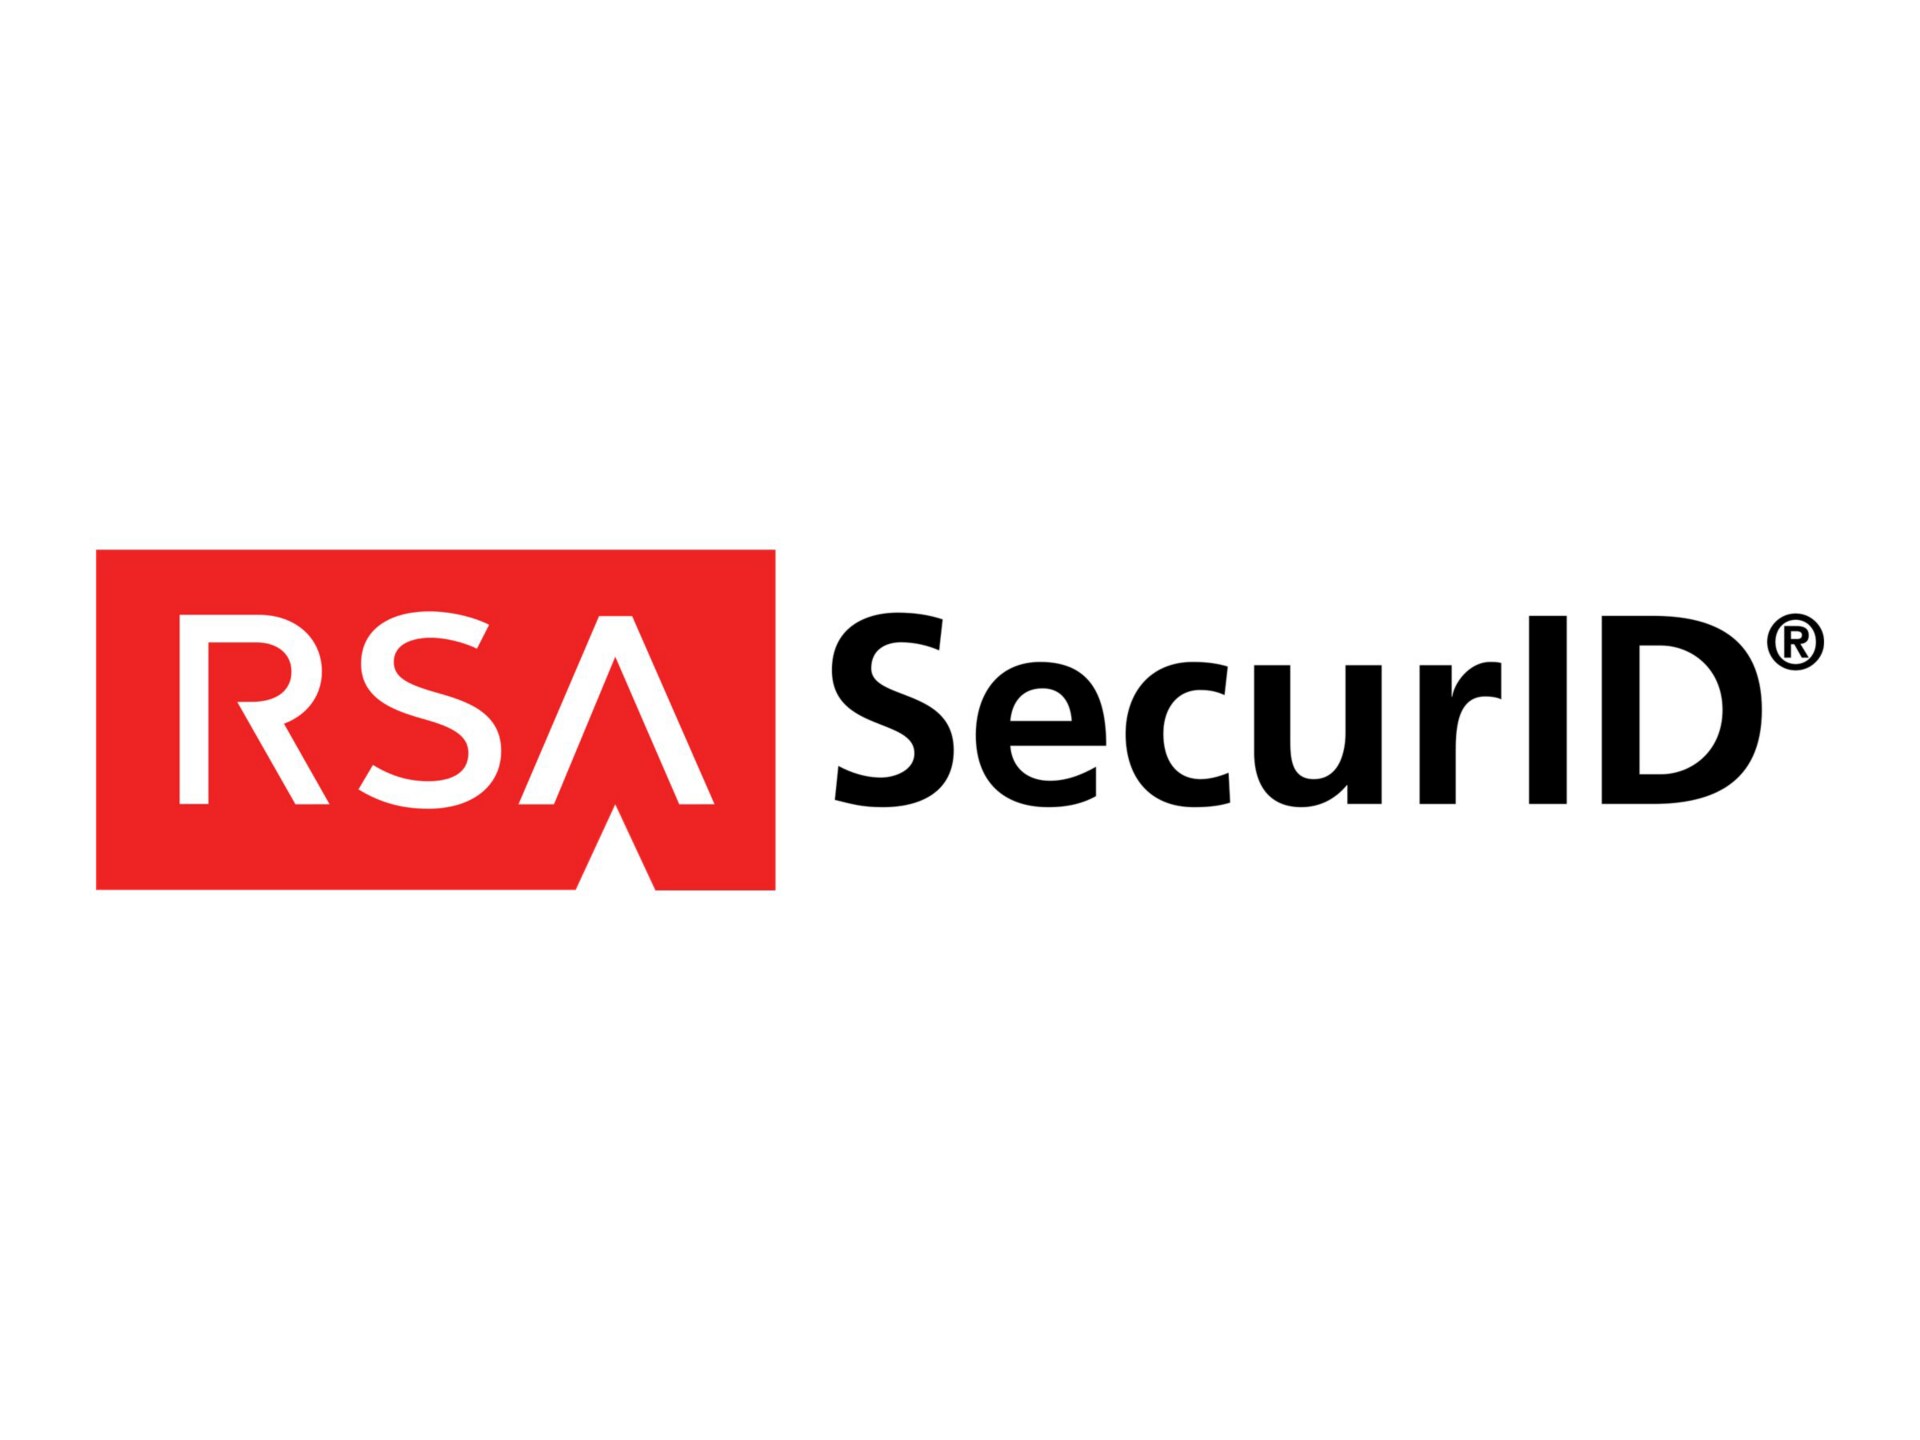 RSA SecurID Software Authenticator - subscription license (5 years) - 1 use